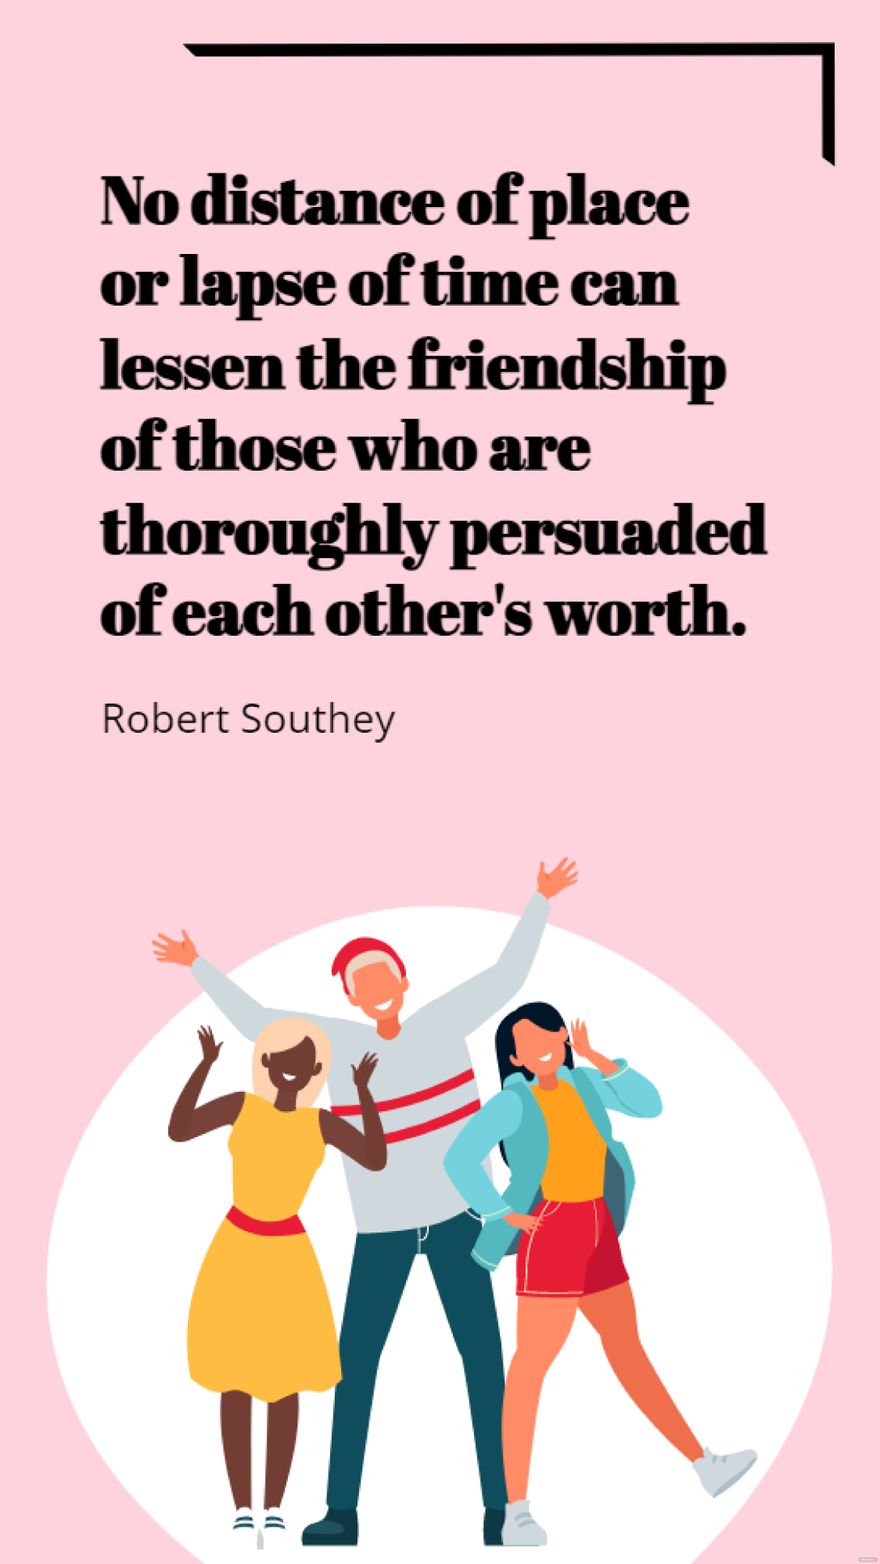 Robert Southey  No distance of place or lapse of time can lessen the friendship of those who are thoroughly persuaded of each others worth